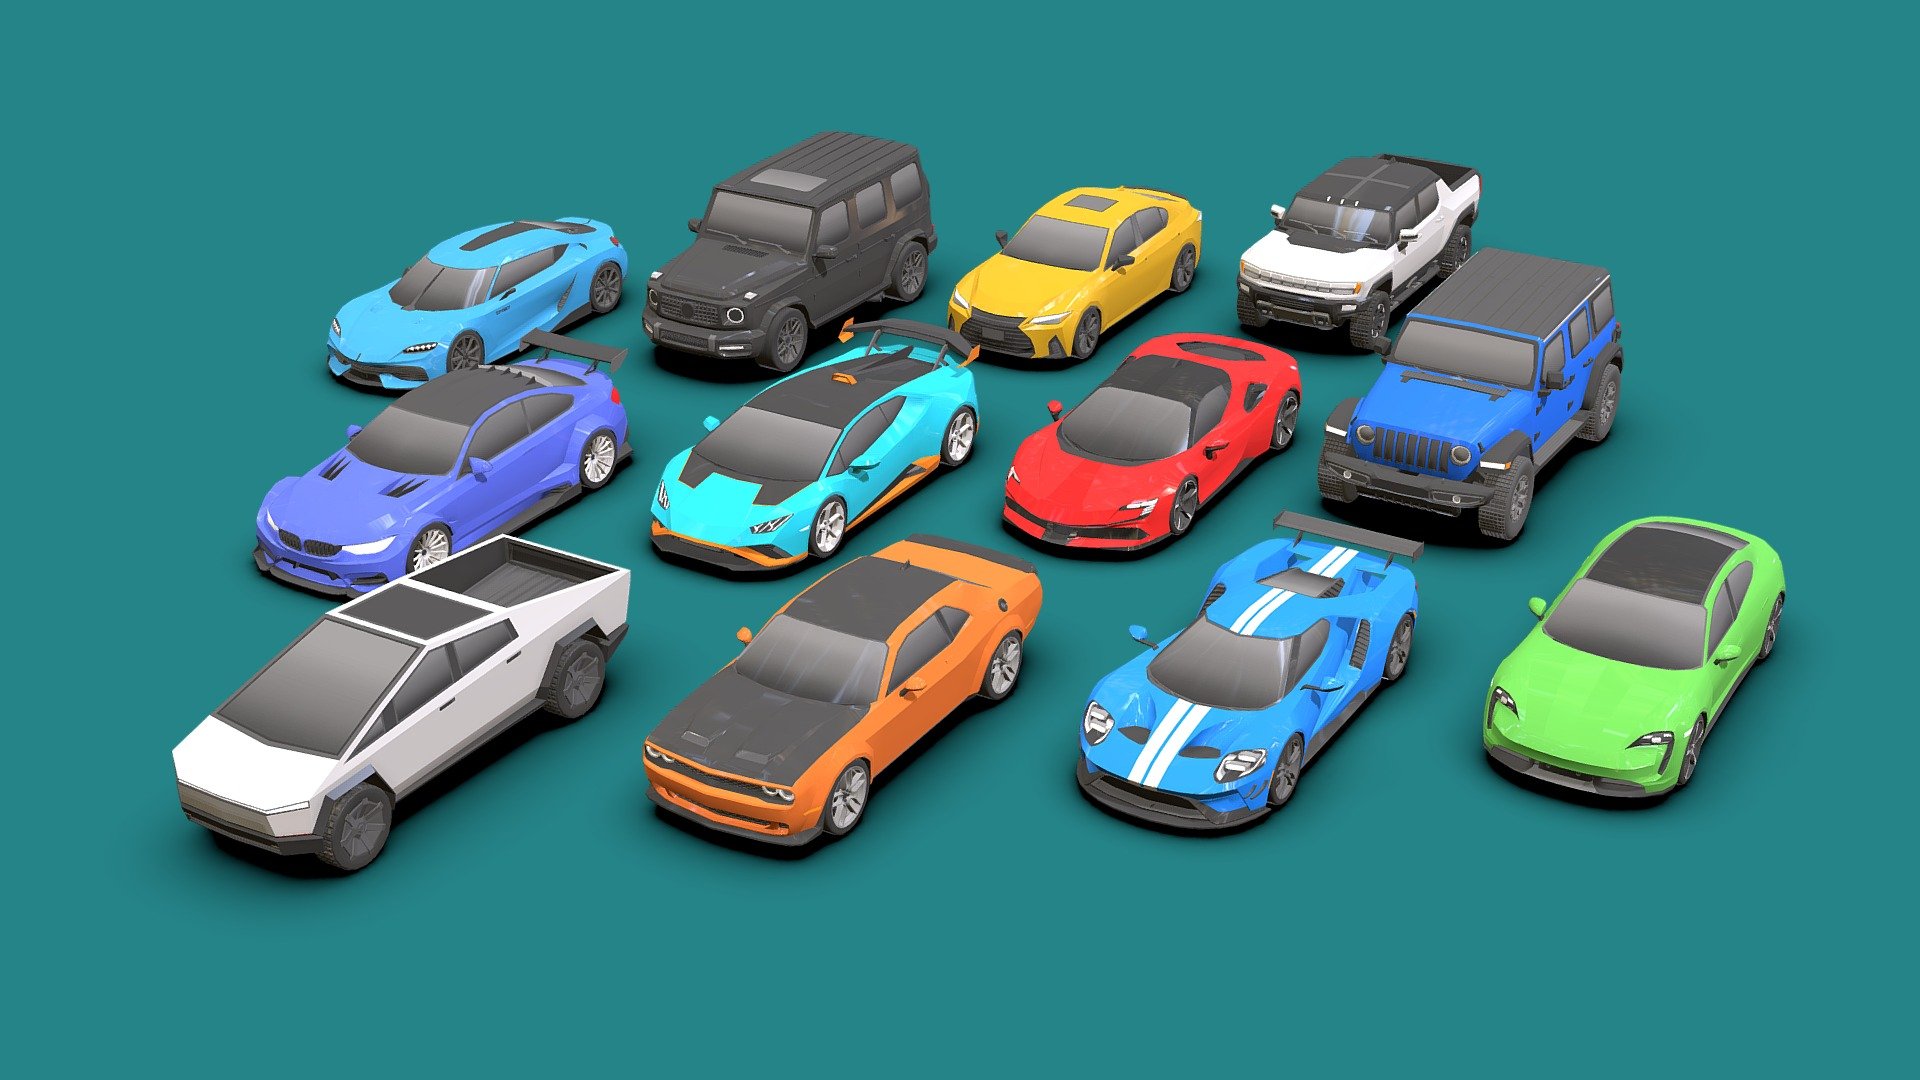 This package includes 12 cars.

Racing Cars Pack Low-Poly .

You can use these models in any game and project.

This model is made with order and precision.

All the colors of wheels and car bodies can be changed .

Separated parts (body. wheel).

Very low poly.

Average poly count: 10/000 Tris.

Texture size: 128/256 (PNG).

Each model has 2 textures .

Each model has 2 or 3 materials .

format: fbx, obj, 3d max

Wait for my new models.. Your friend (Sidra) - Racing Cars Pack Low-Poly - 3D model by Sidra (@Sidramax) 3d model